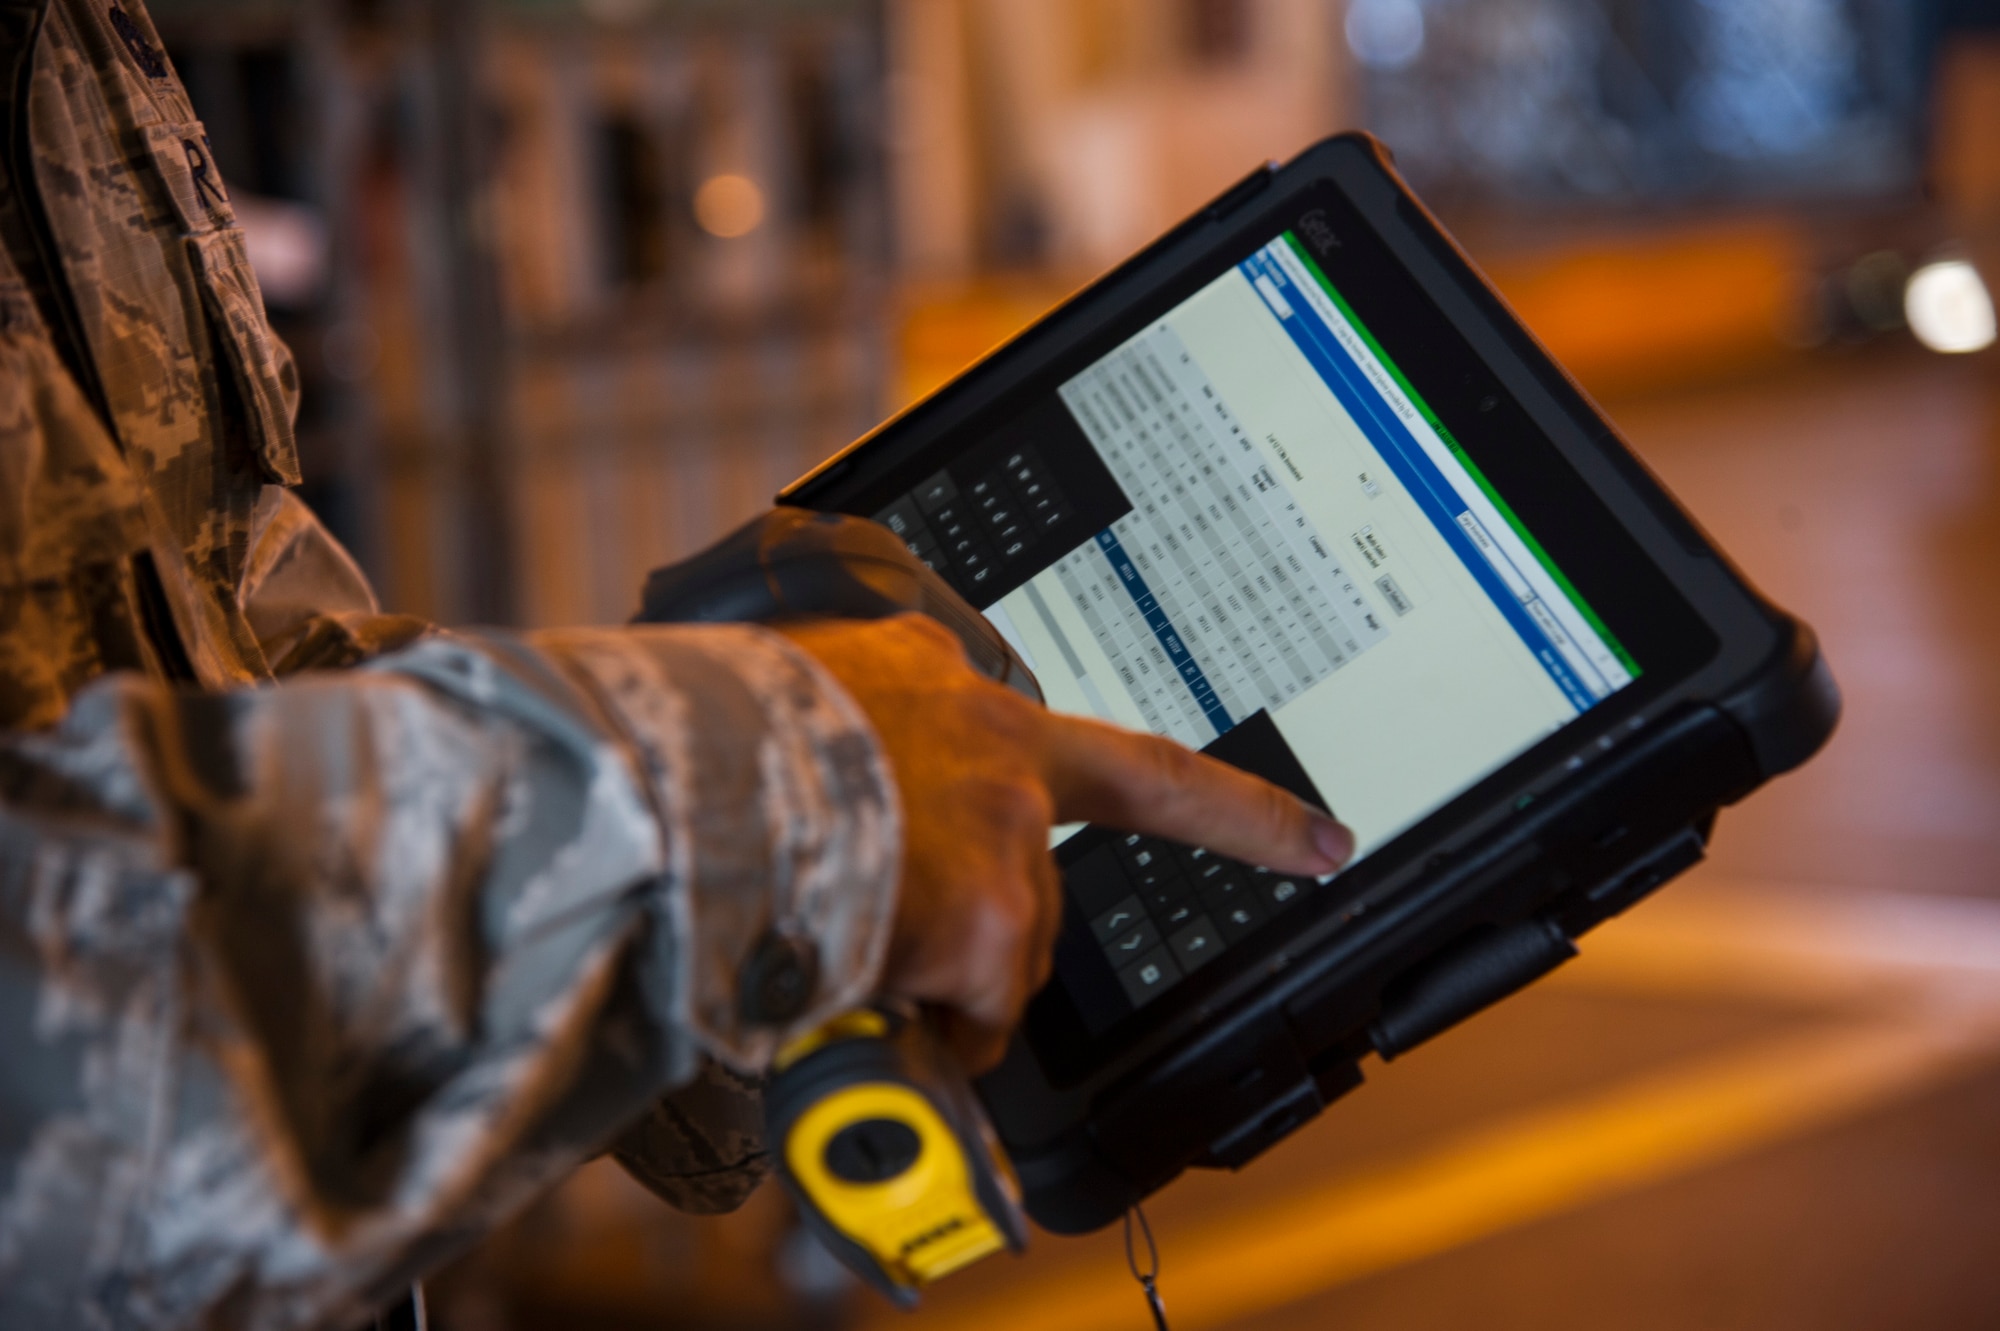 Staff Sgt. Philip Beasley, 735th Air Mobility Squadron assistant air freight shift supervisor, performs cargo inventory using a new digital program at Joint Base Pearl Harbor-Hickam, Hawaii, Aug. 24, 2017.